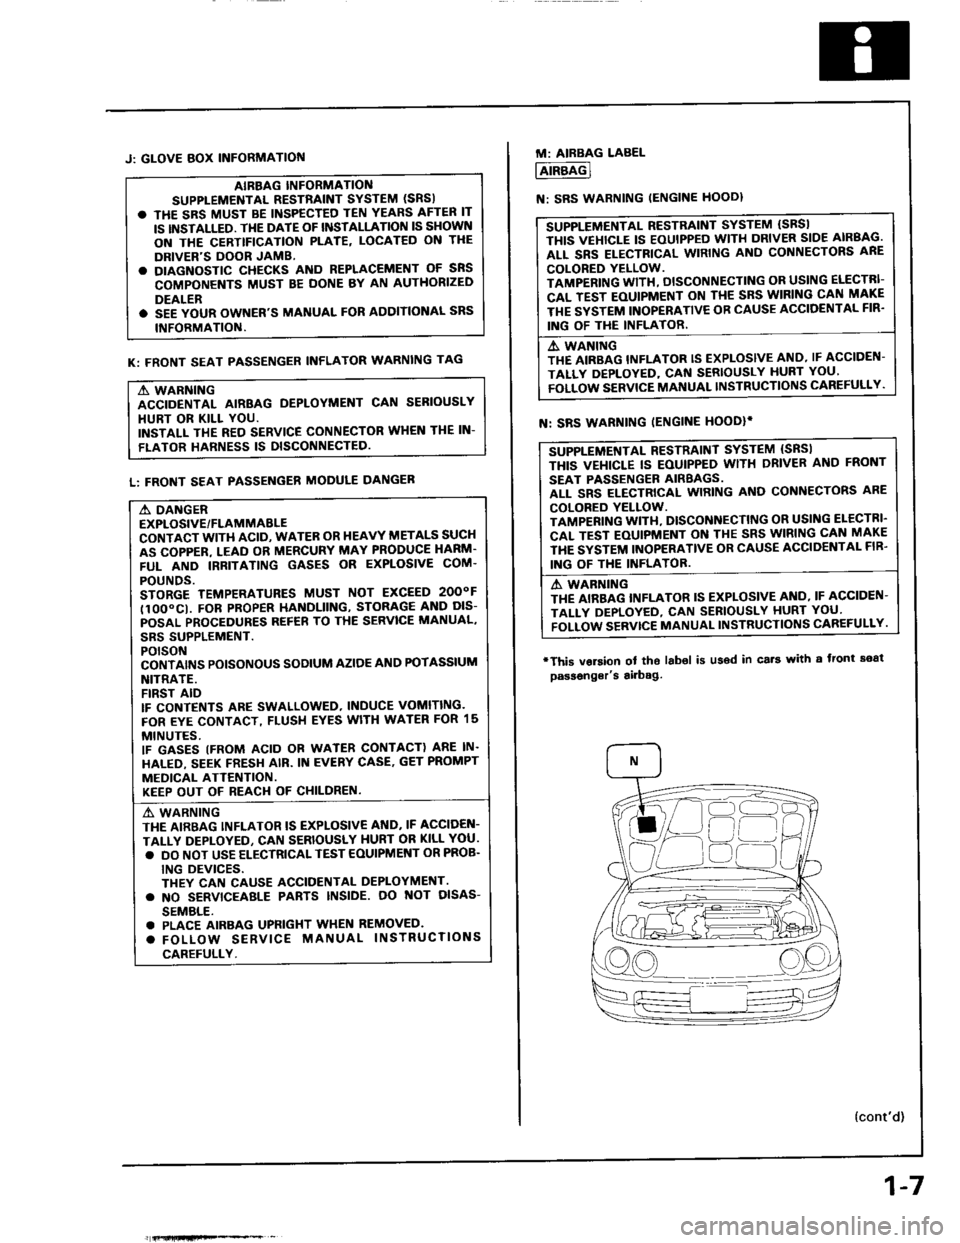 HONDA INTEGRA 1994 4.G Workshop Manual J: GLOVE BOX INFORMATIOf{
AIBBAG INFORMANO
SUPPLEMENTAL RESTiAINT SYSTEM (SRS)
. THE SRS MUST BE INSPECTED TEN YEARS AFTER IT
IS INSTALLED. TI{E DATE OF INSTALLATION IS SHOWN
ON THE CERTTFICATION PLAT